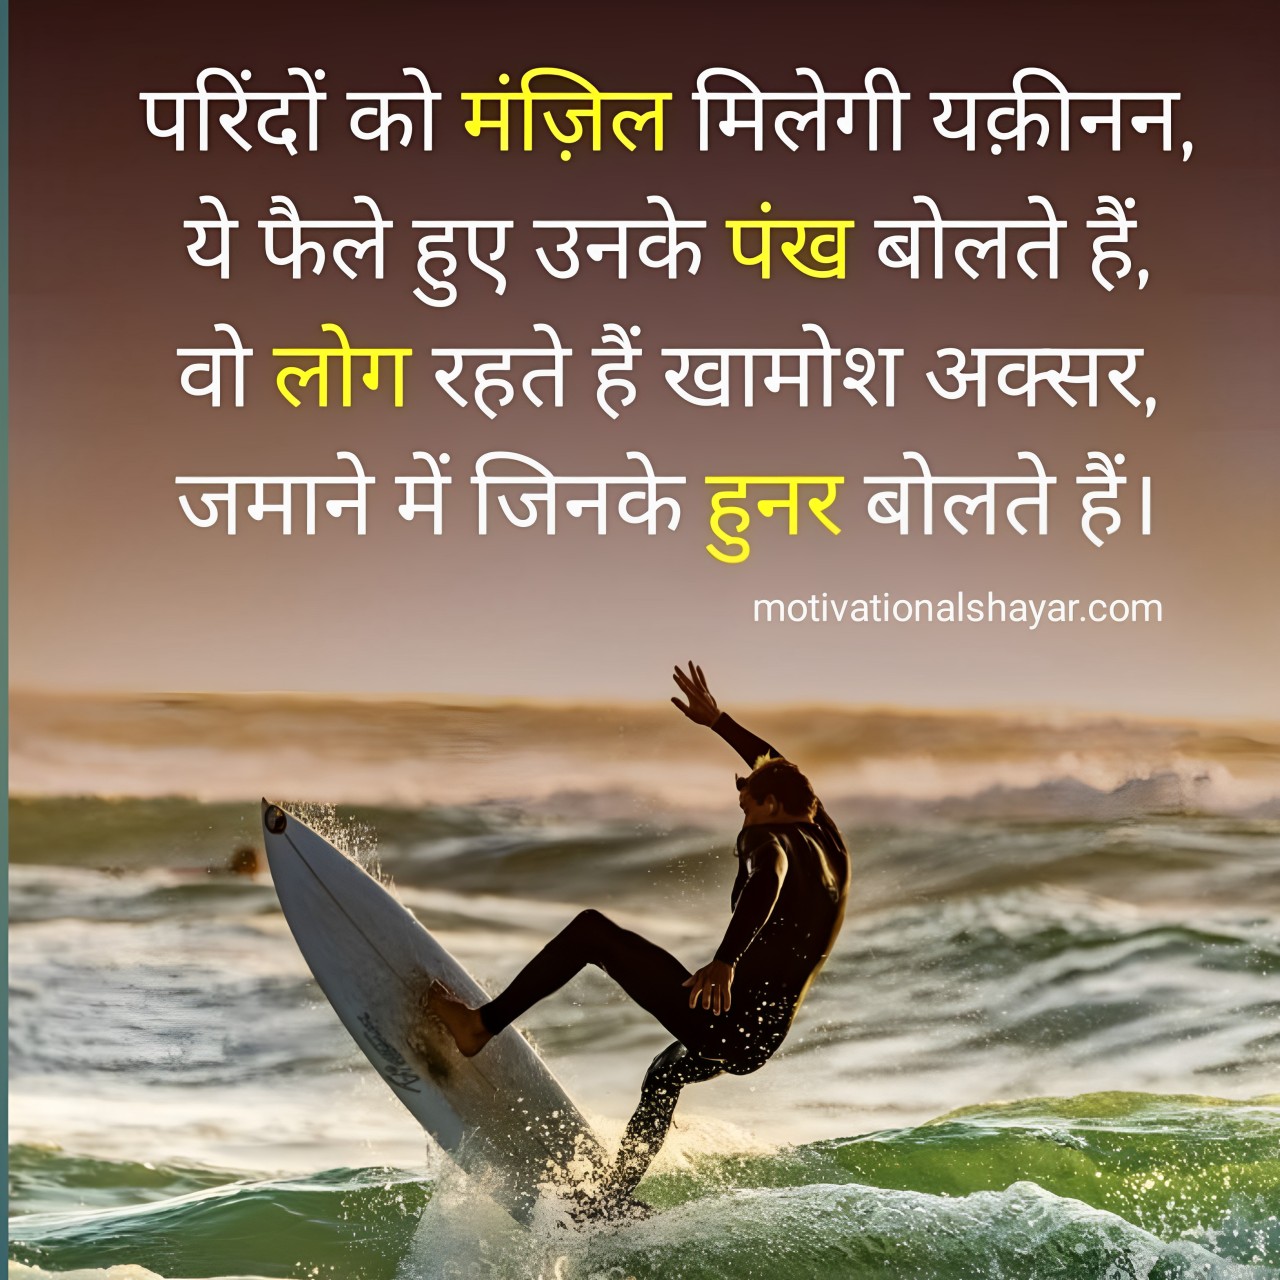 Lifetime Motivational Quotes in Hindi for Success